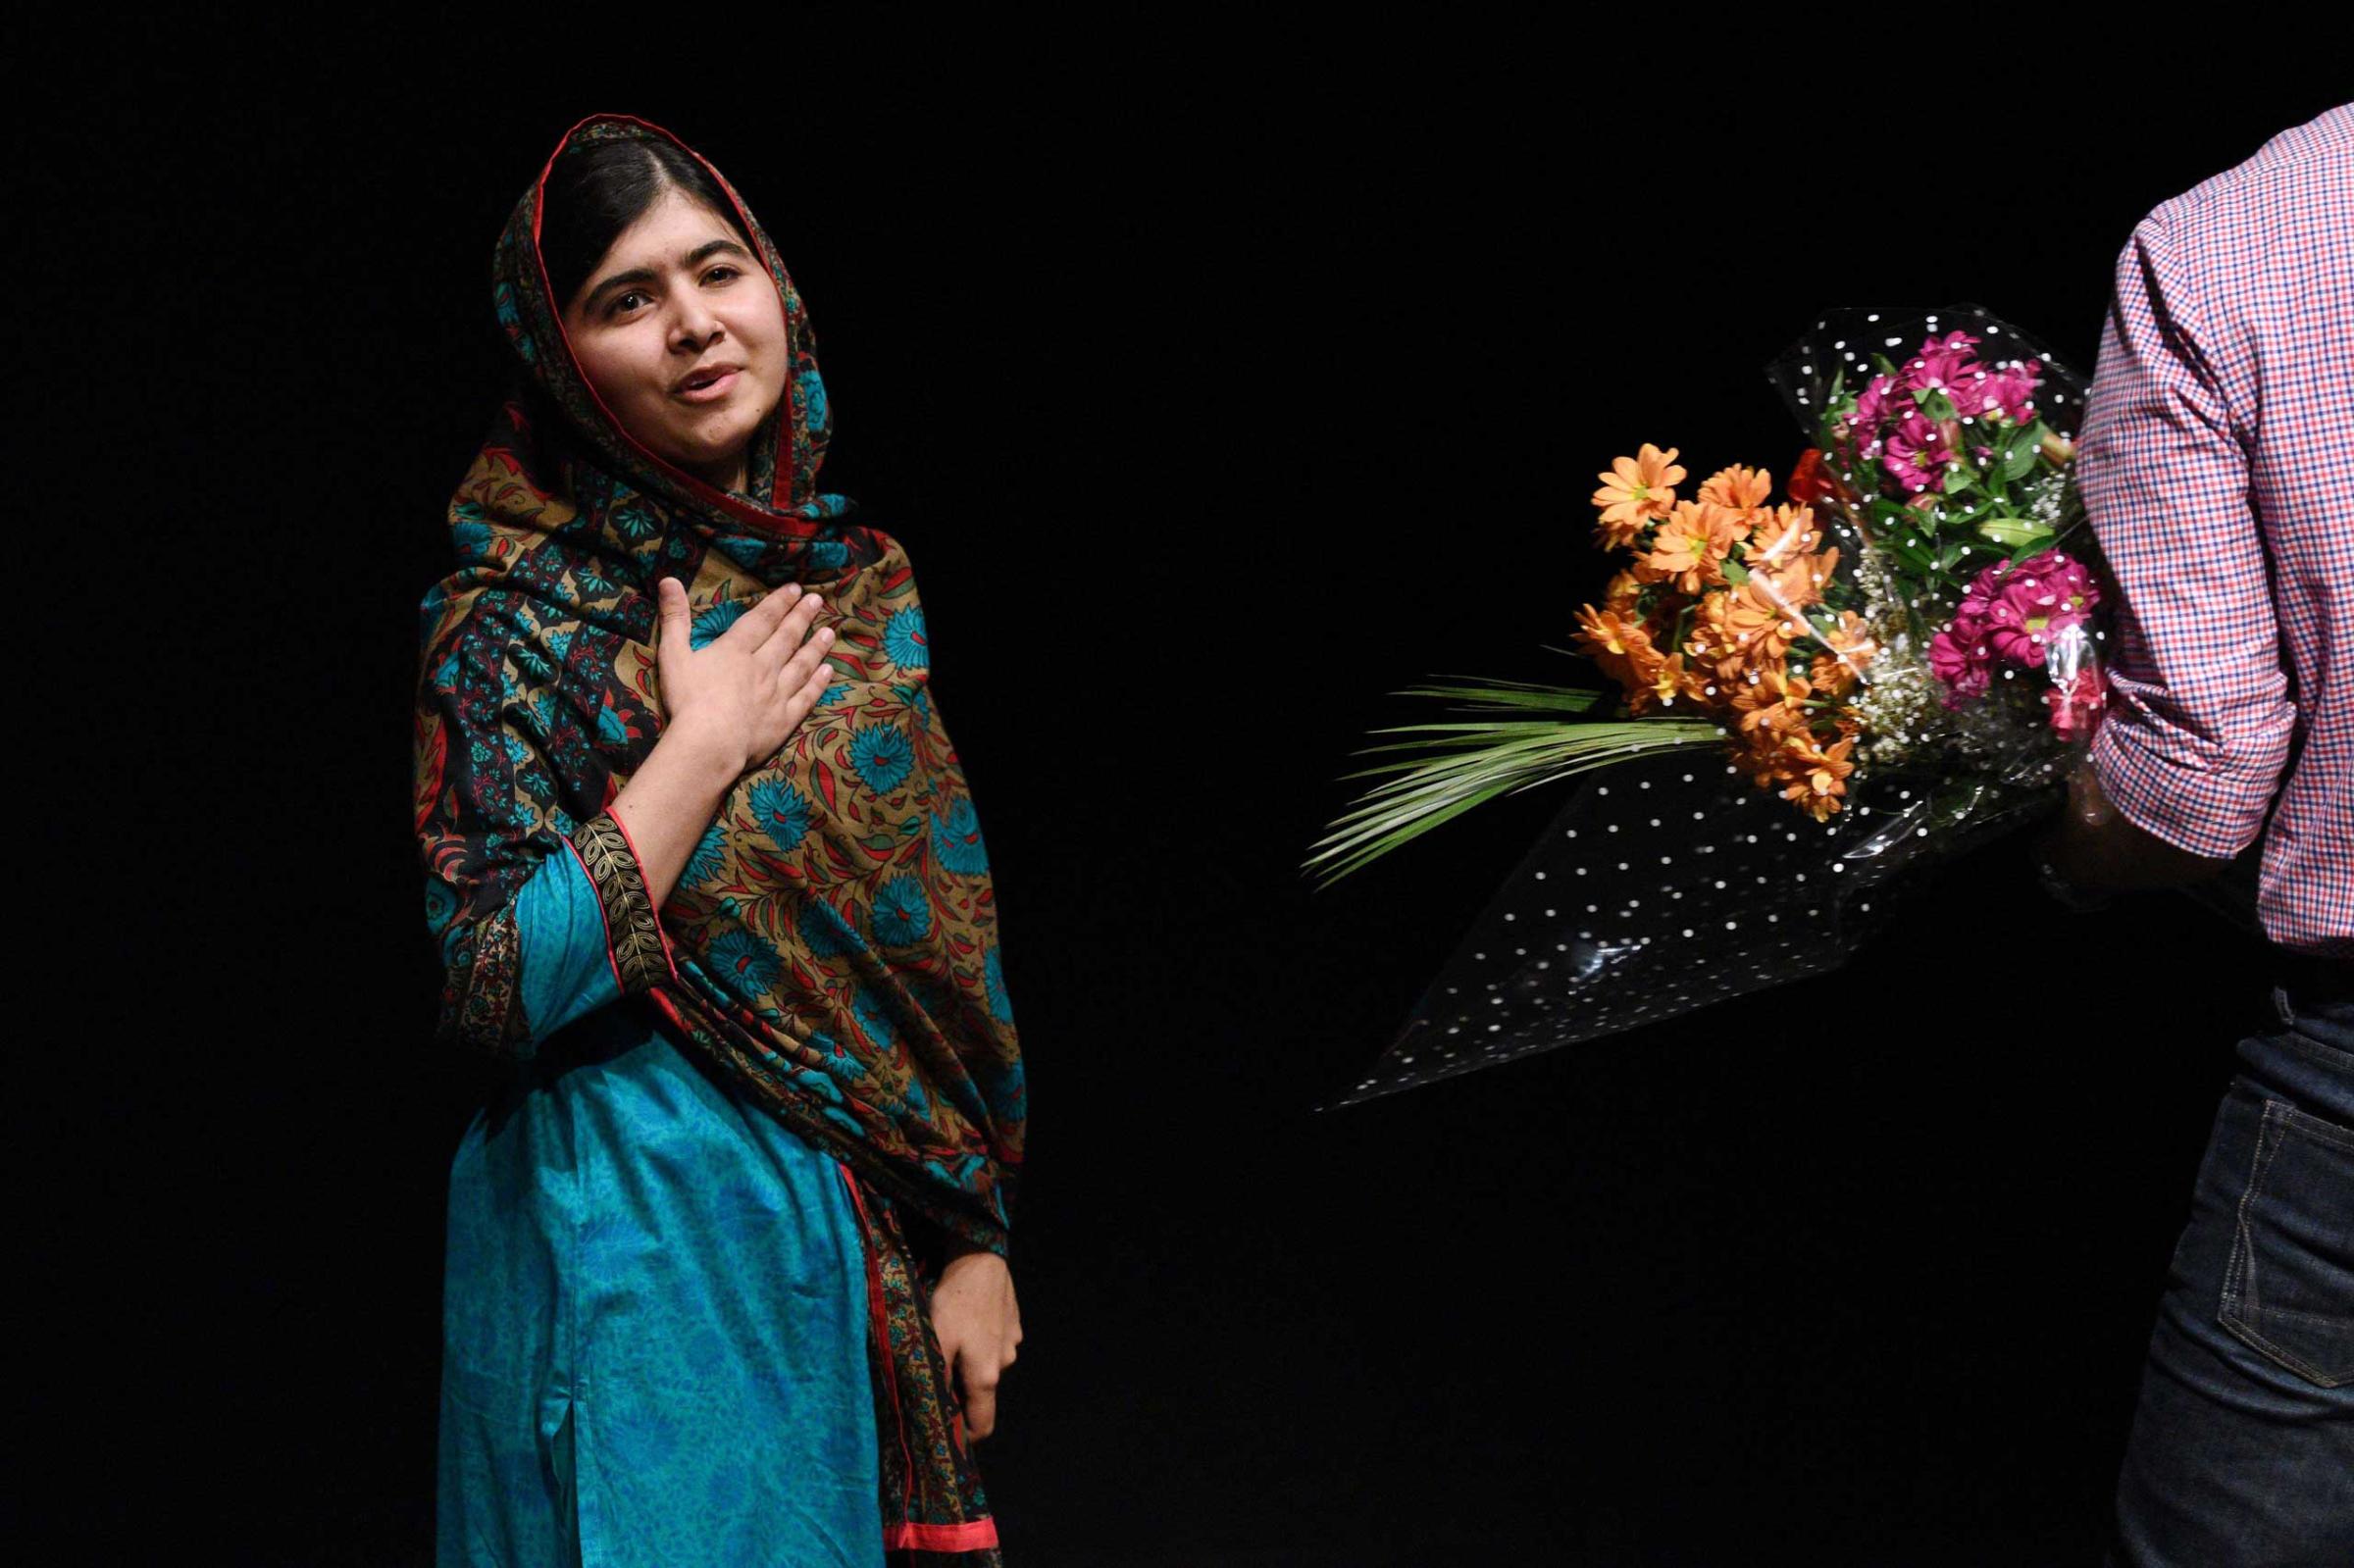 Malala Yousafzai, Pakistani girls’-rights and education activist, accepts flowers in Birmingham, England, after being named a Nobel Peace Prize winner (with India’s Kailash Satyarthi) on Oct. 10.